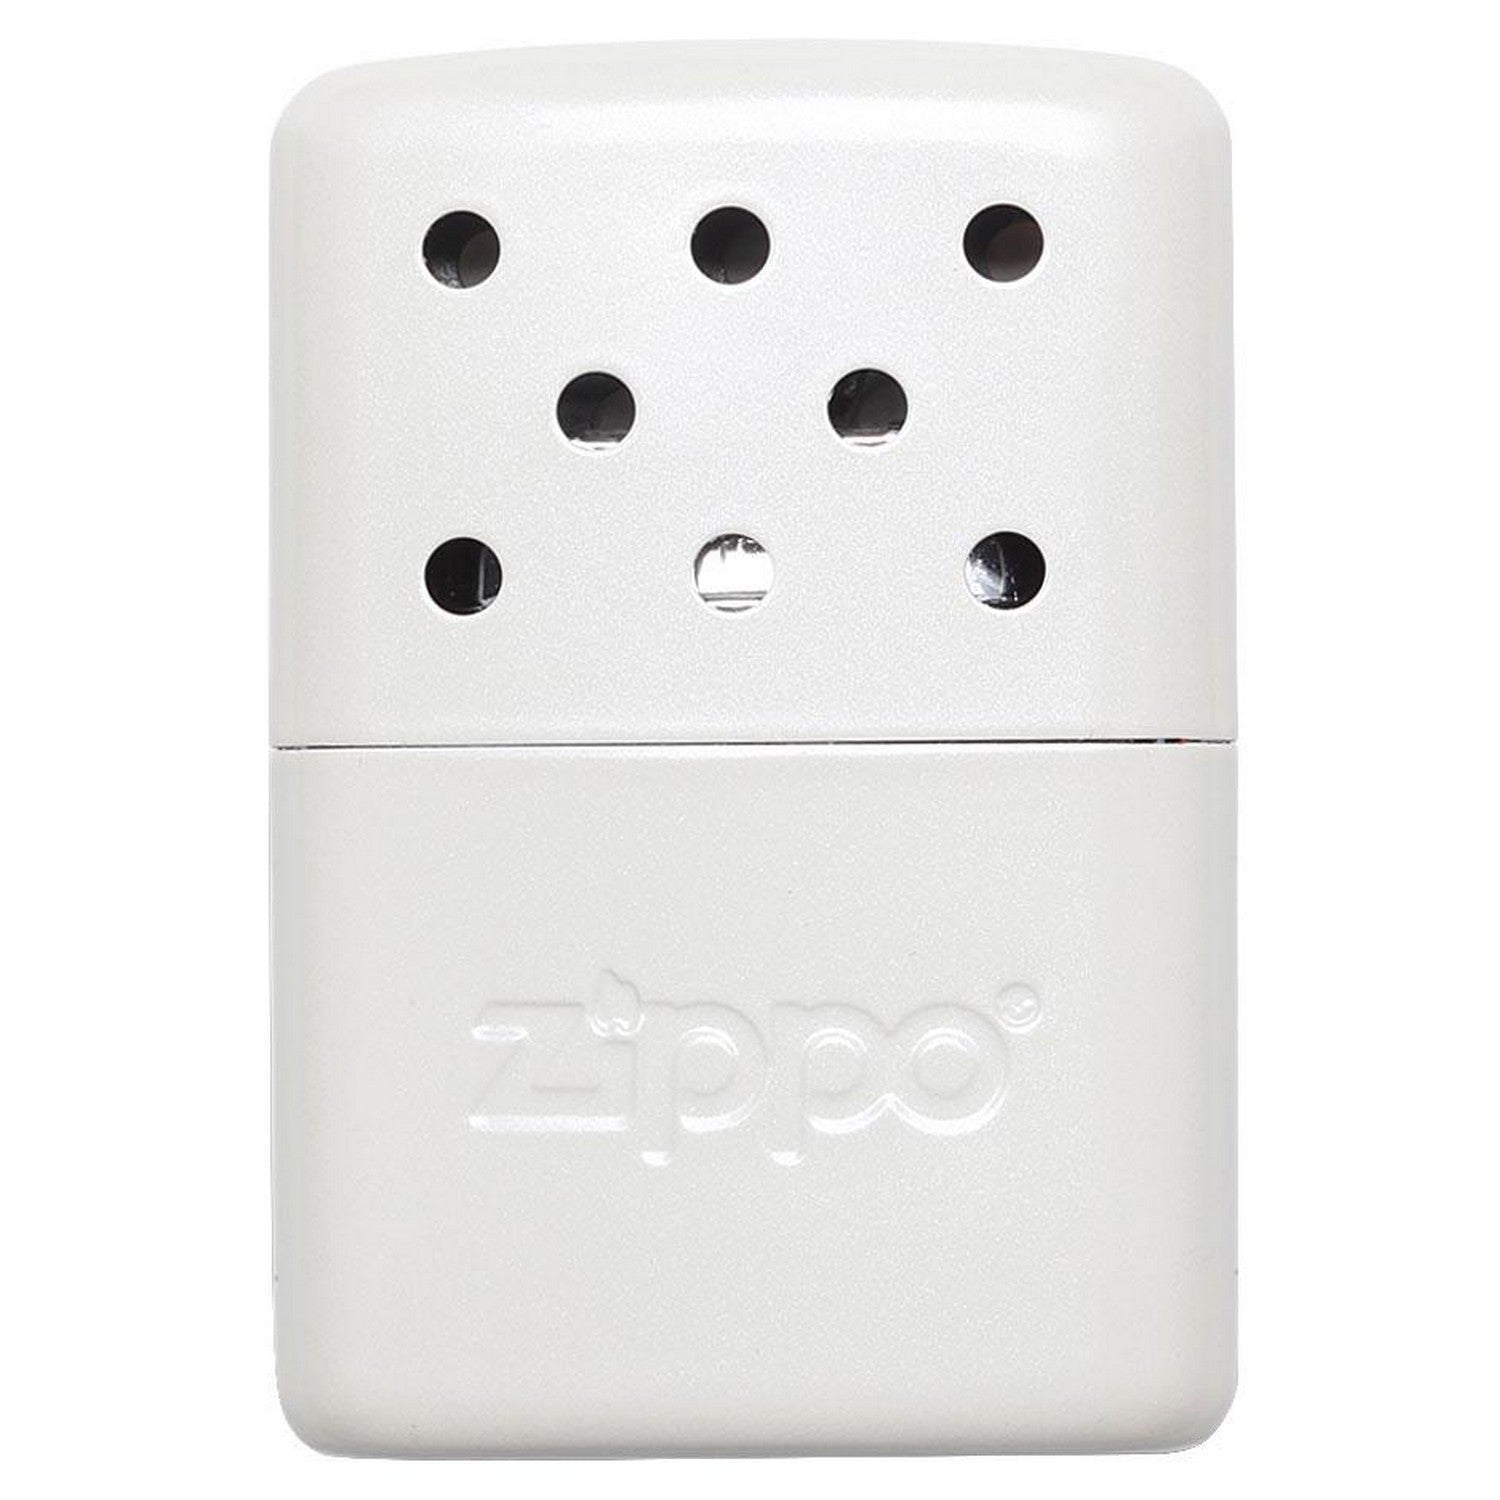 Zippo 6 Hour Catalytic Refillable Metal Pearl White Hand Warmer